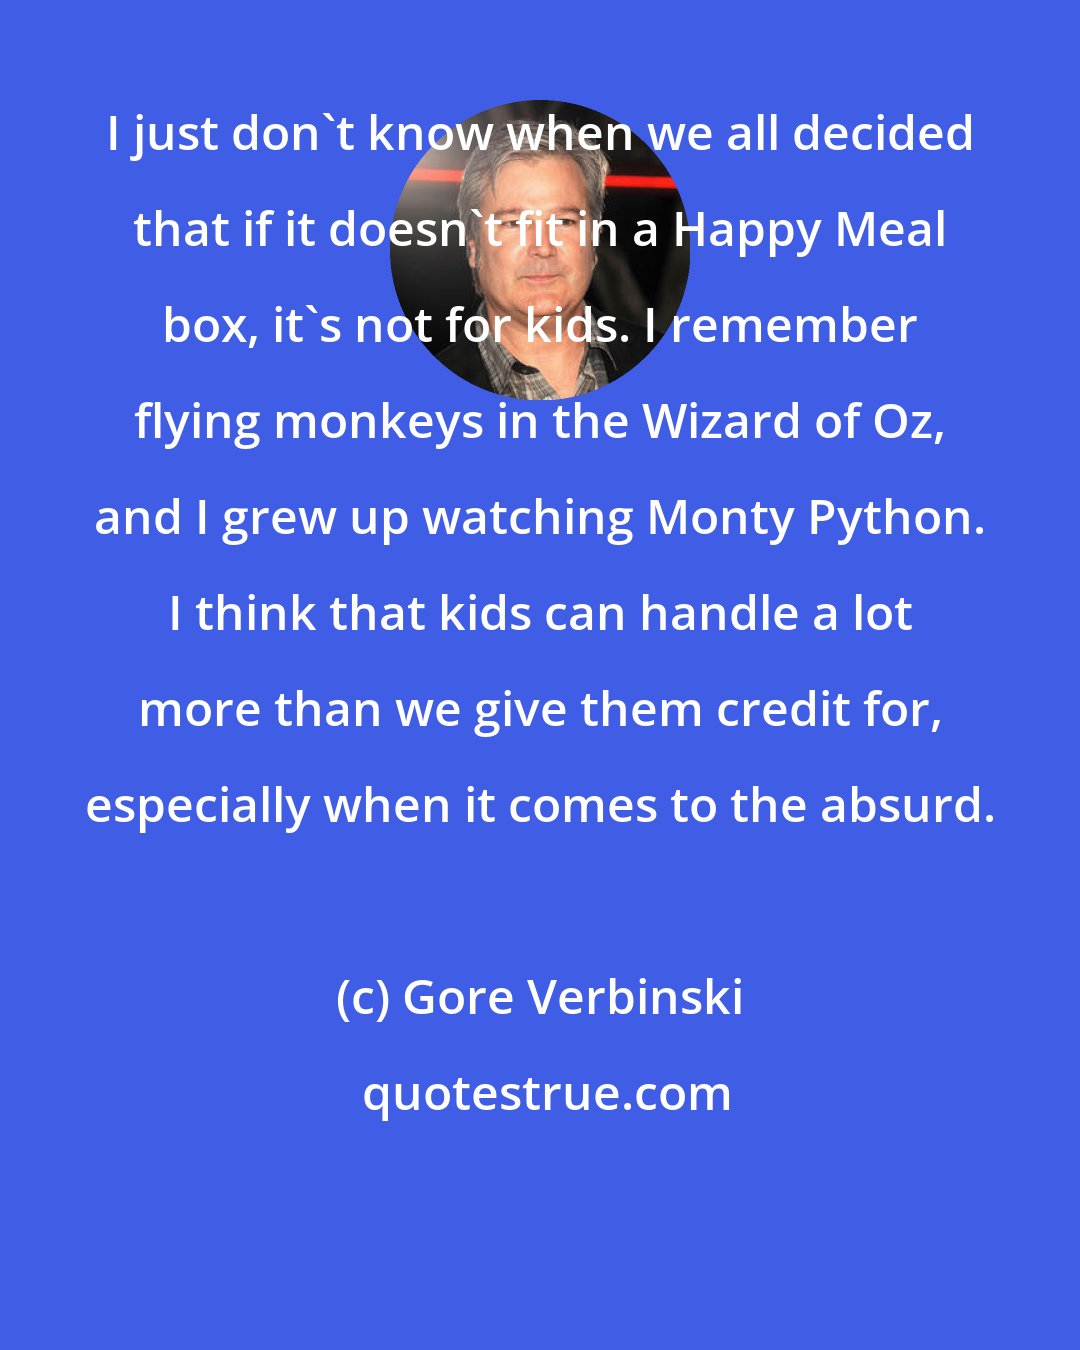 Gore Verbinski: I just don't know when we all decided that if it doesn't fit in a Happy Meal box, it's not for kids. I remember flying monkeys in the Wizard of Oz, and I grew up watching Monty Python. I think that kids can handle a lot more than we give them credit for, especially when it comes to the absurd.